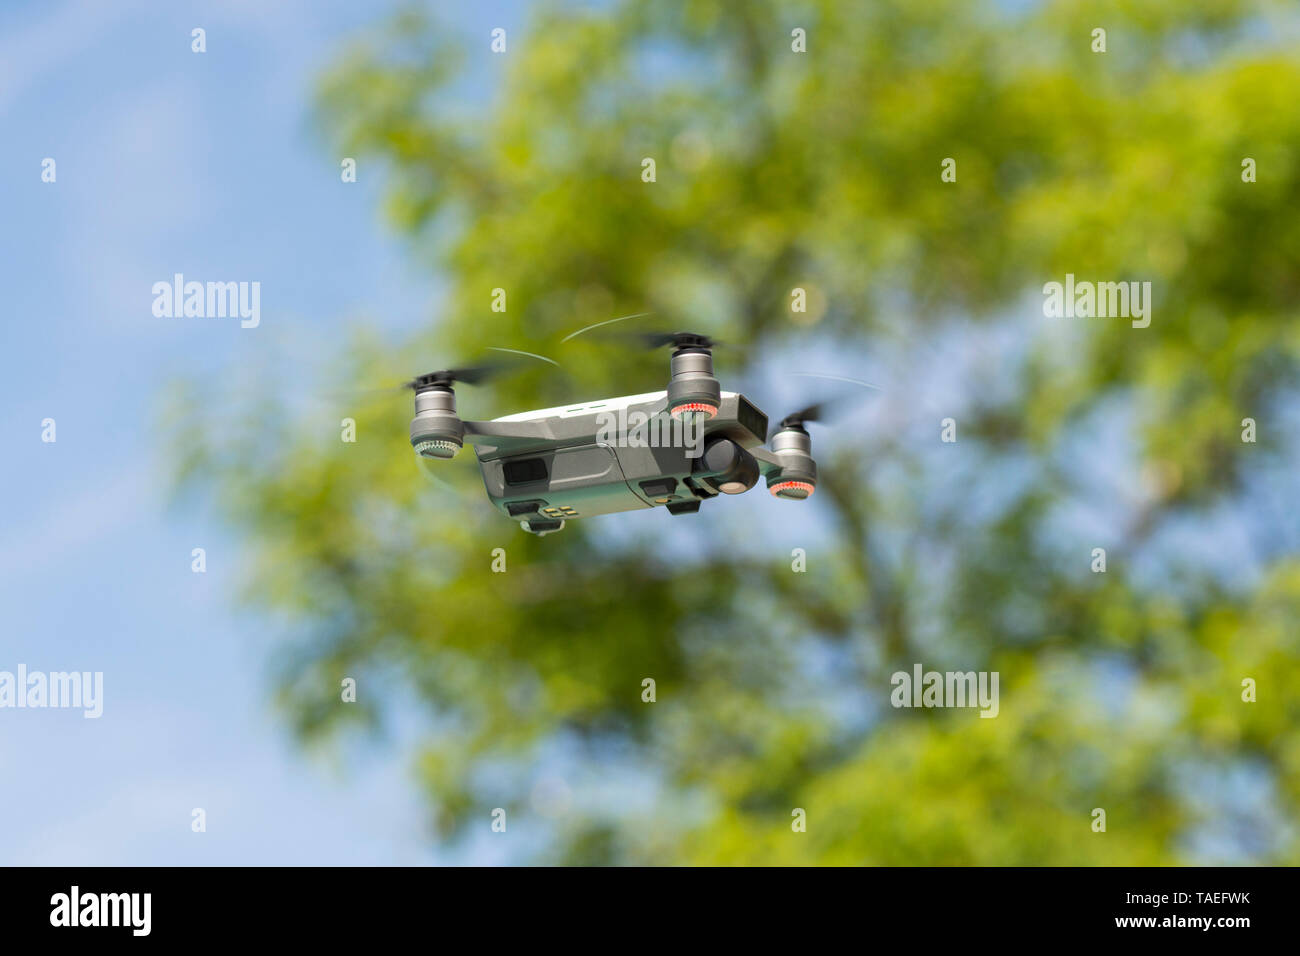 Drone copter, DJI Spark, flying with high resolution digital camera, hovering and passing trees. Stock Photo